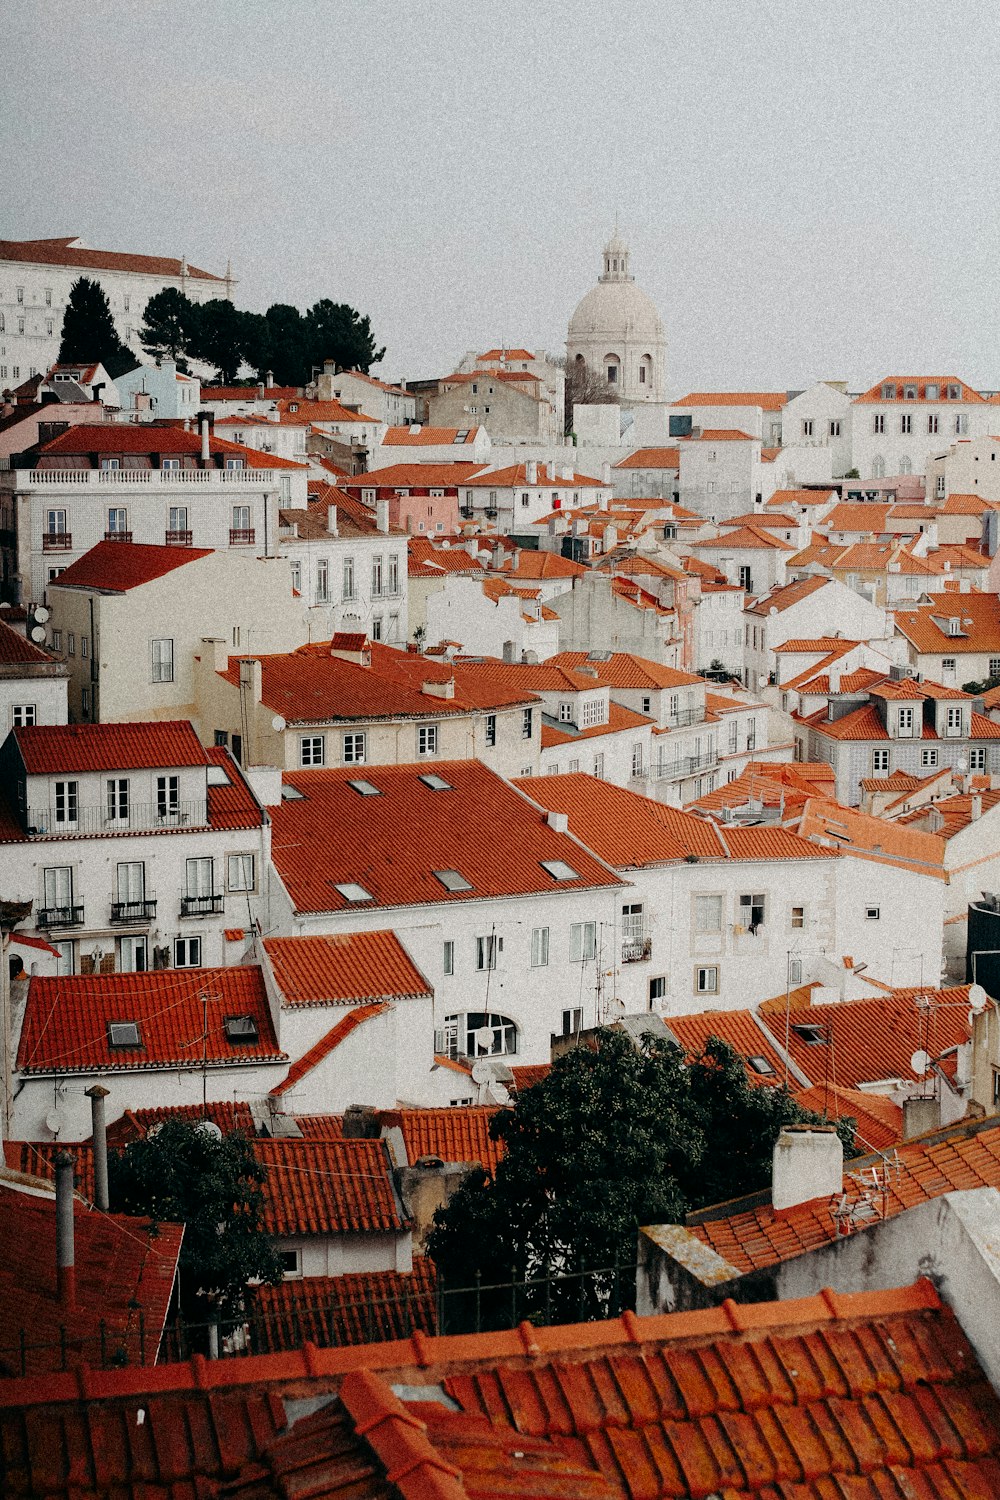 a view of a city with red roofs